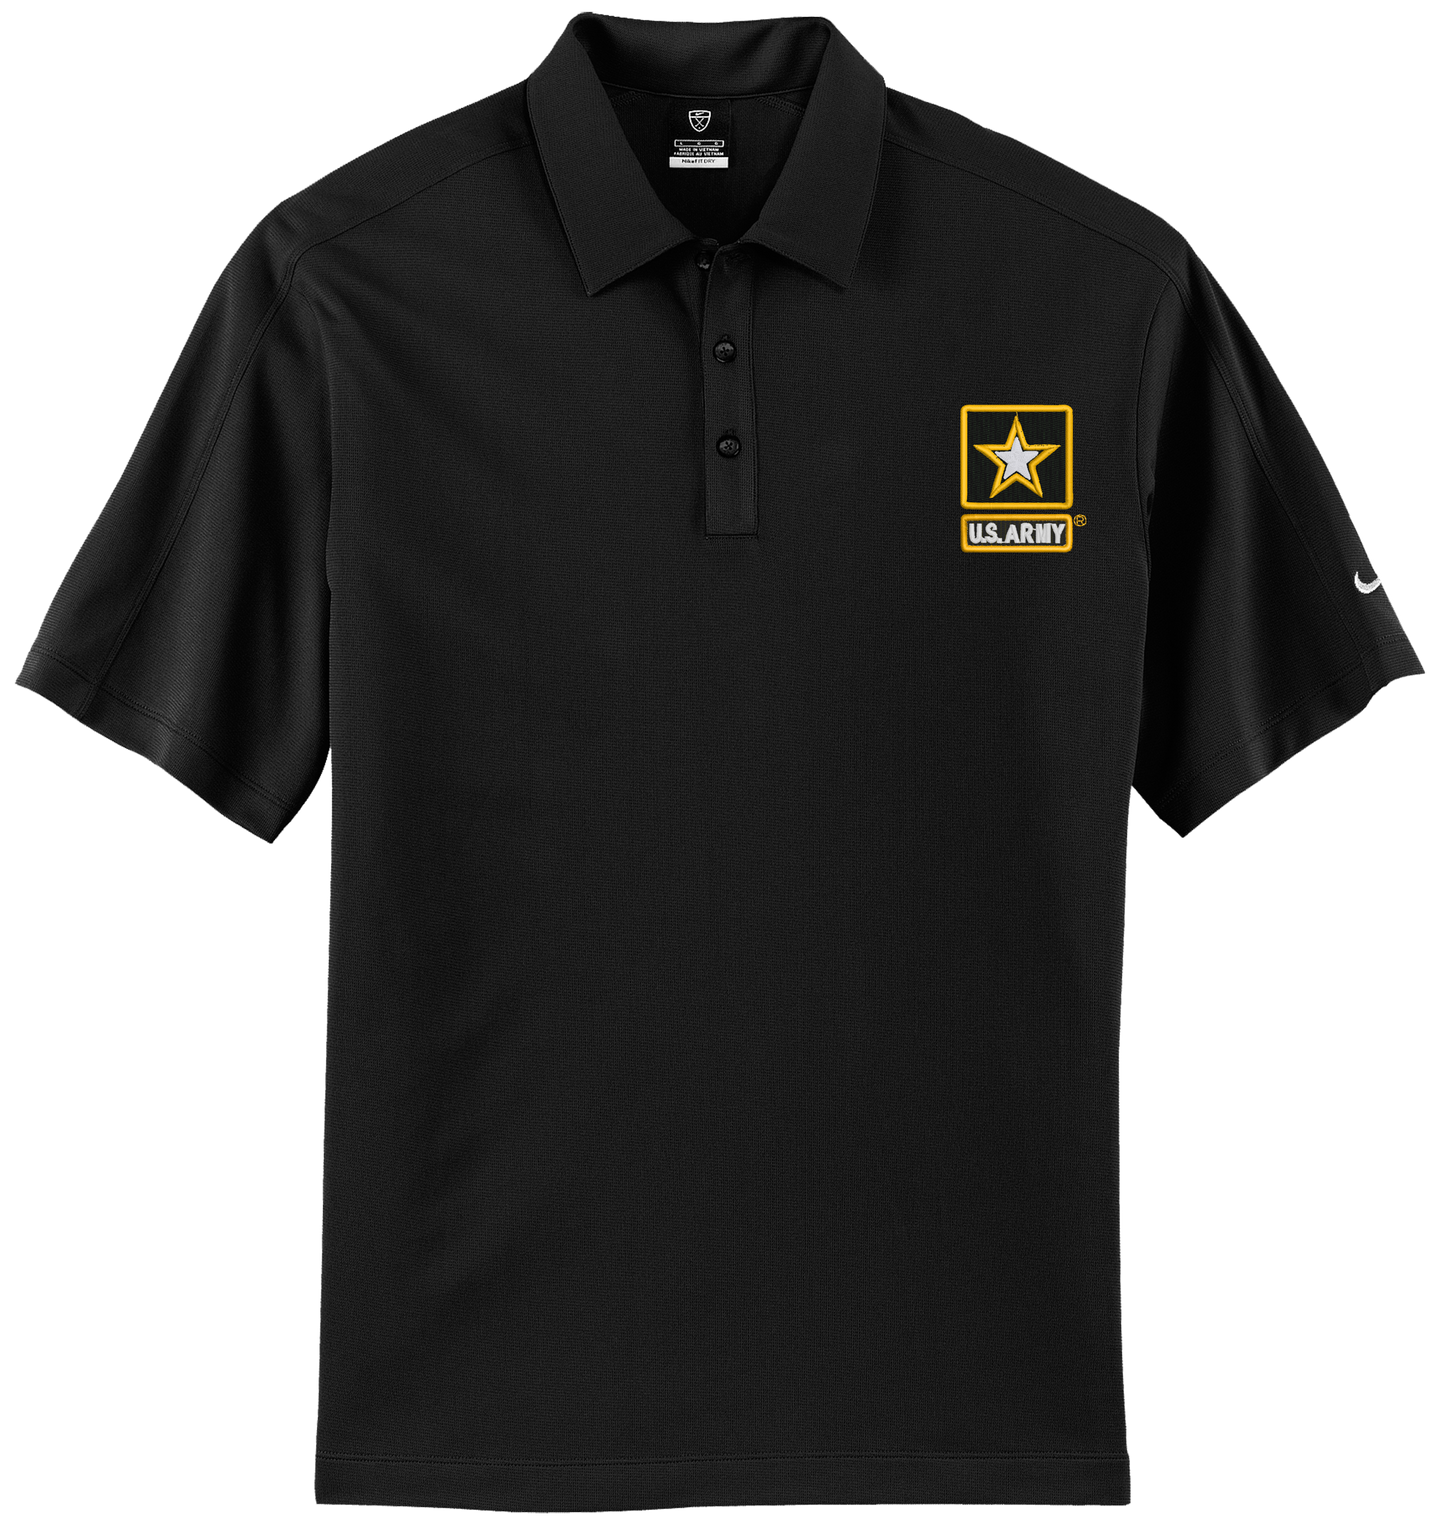 US Army Star Embroidered on Black Polo